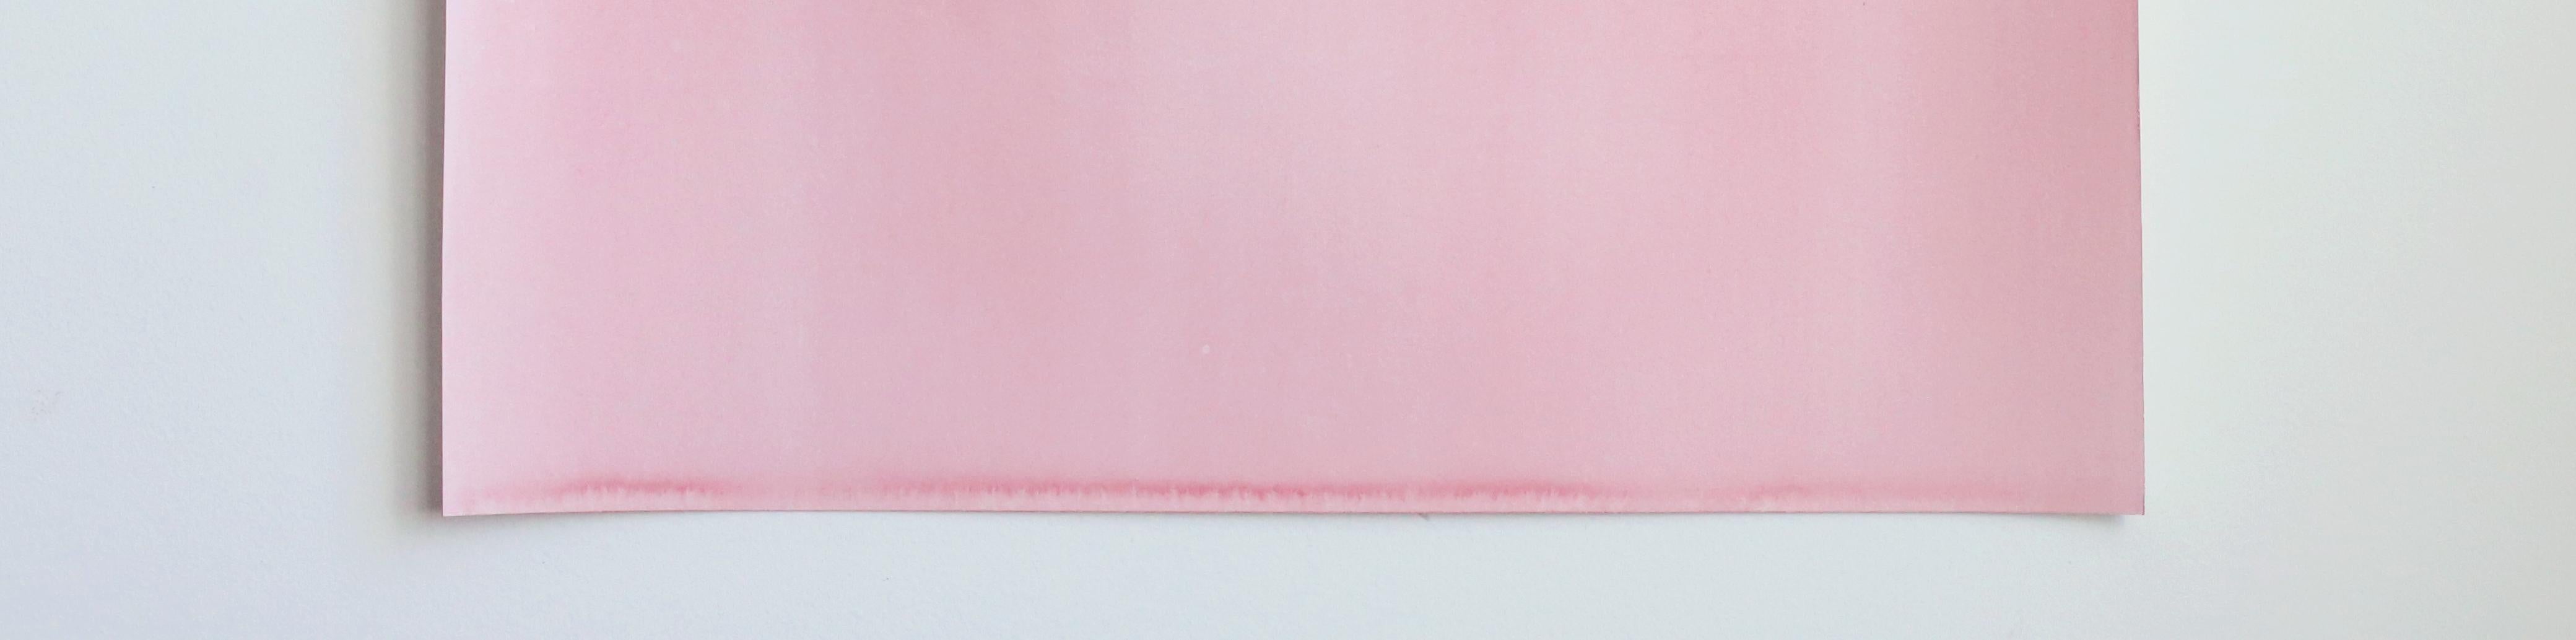 Contemporary watercolor on paper drawing GJ Kimsunken 'Untitled' pink minimal 3